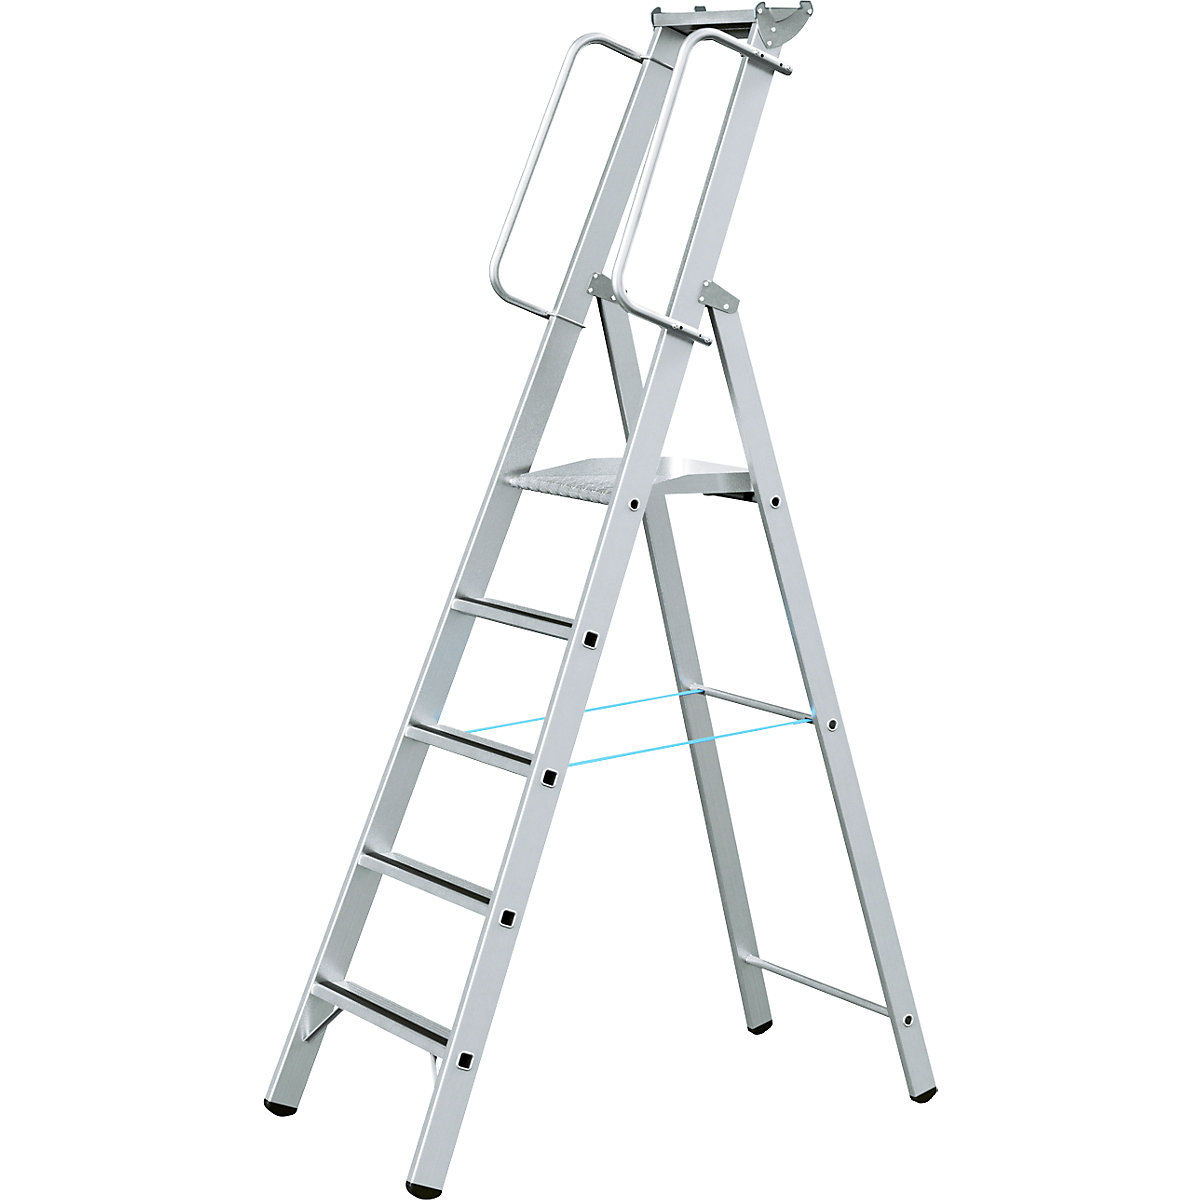 Aluminium step ladder with large platform – ZARGES, with hand rail on both sides, for self-assembly, 5 steps-7